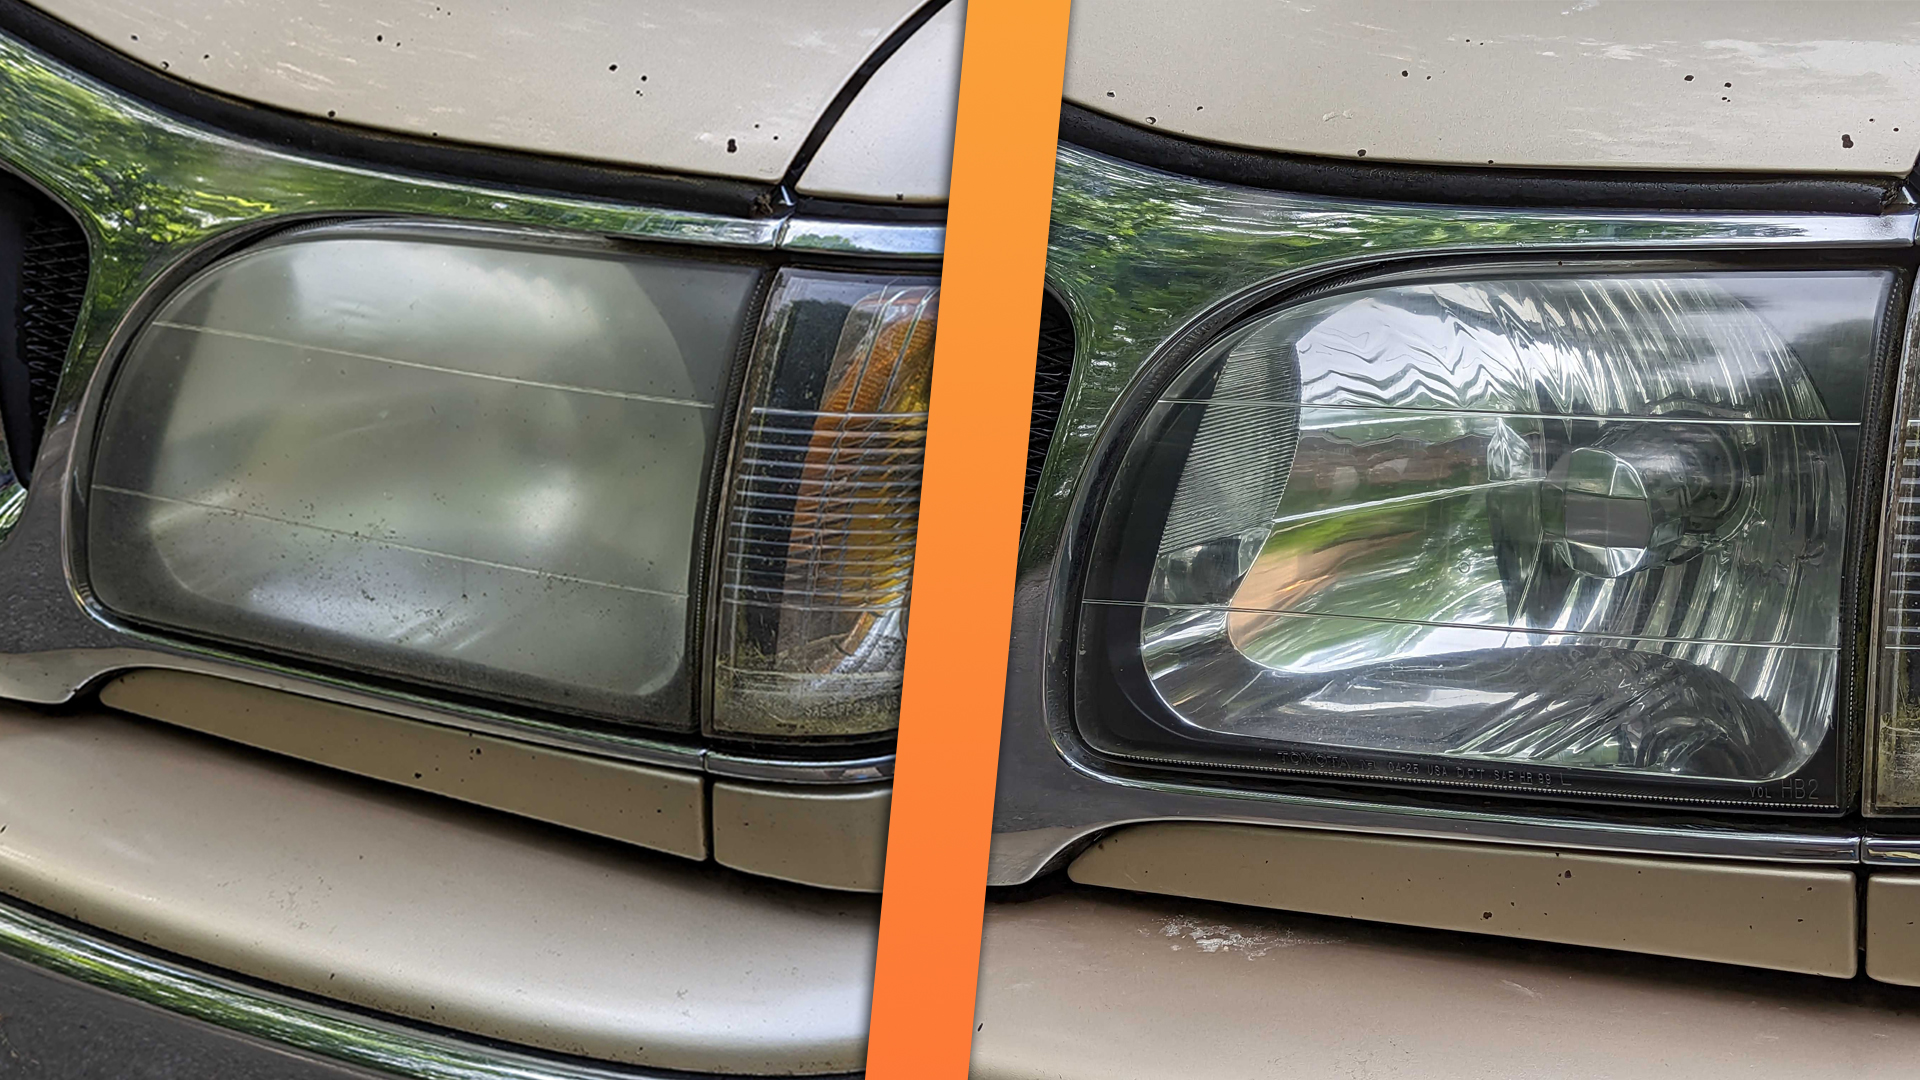 Polishing Headlights..How well does the Mothers Powerball kit work? 